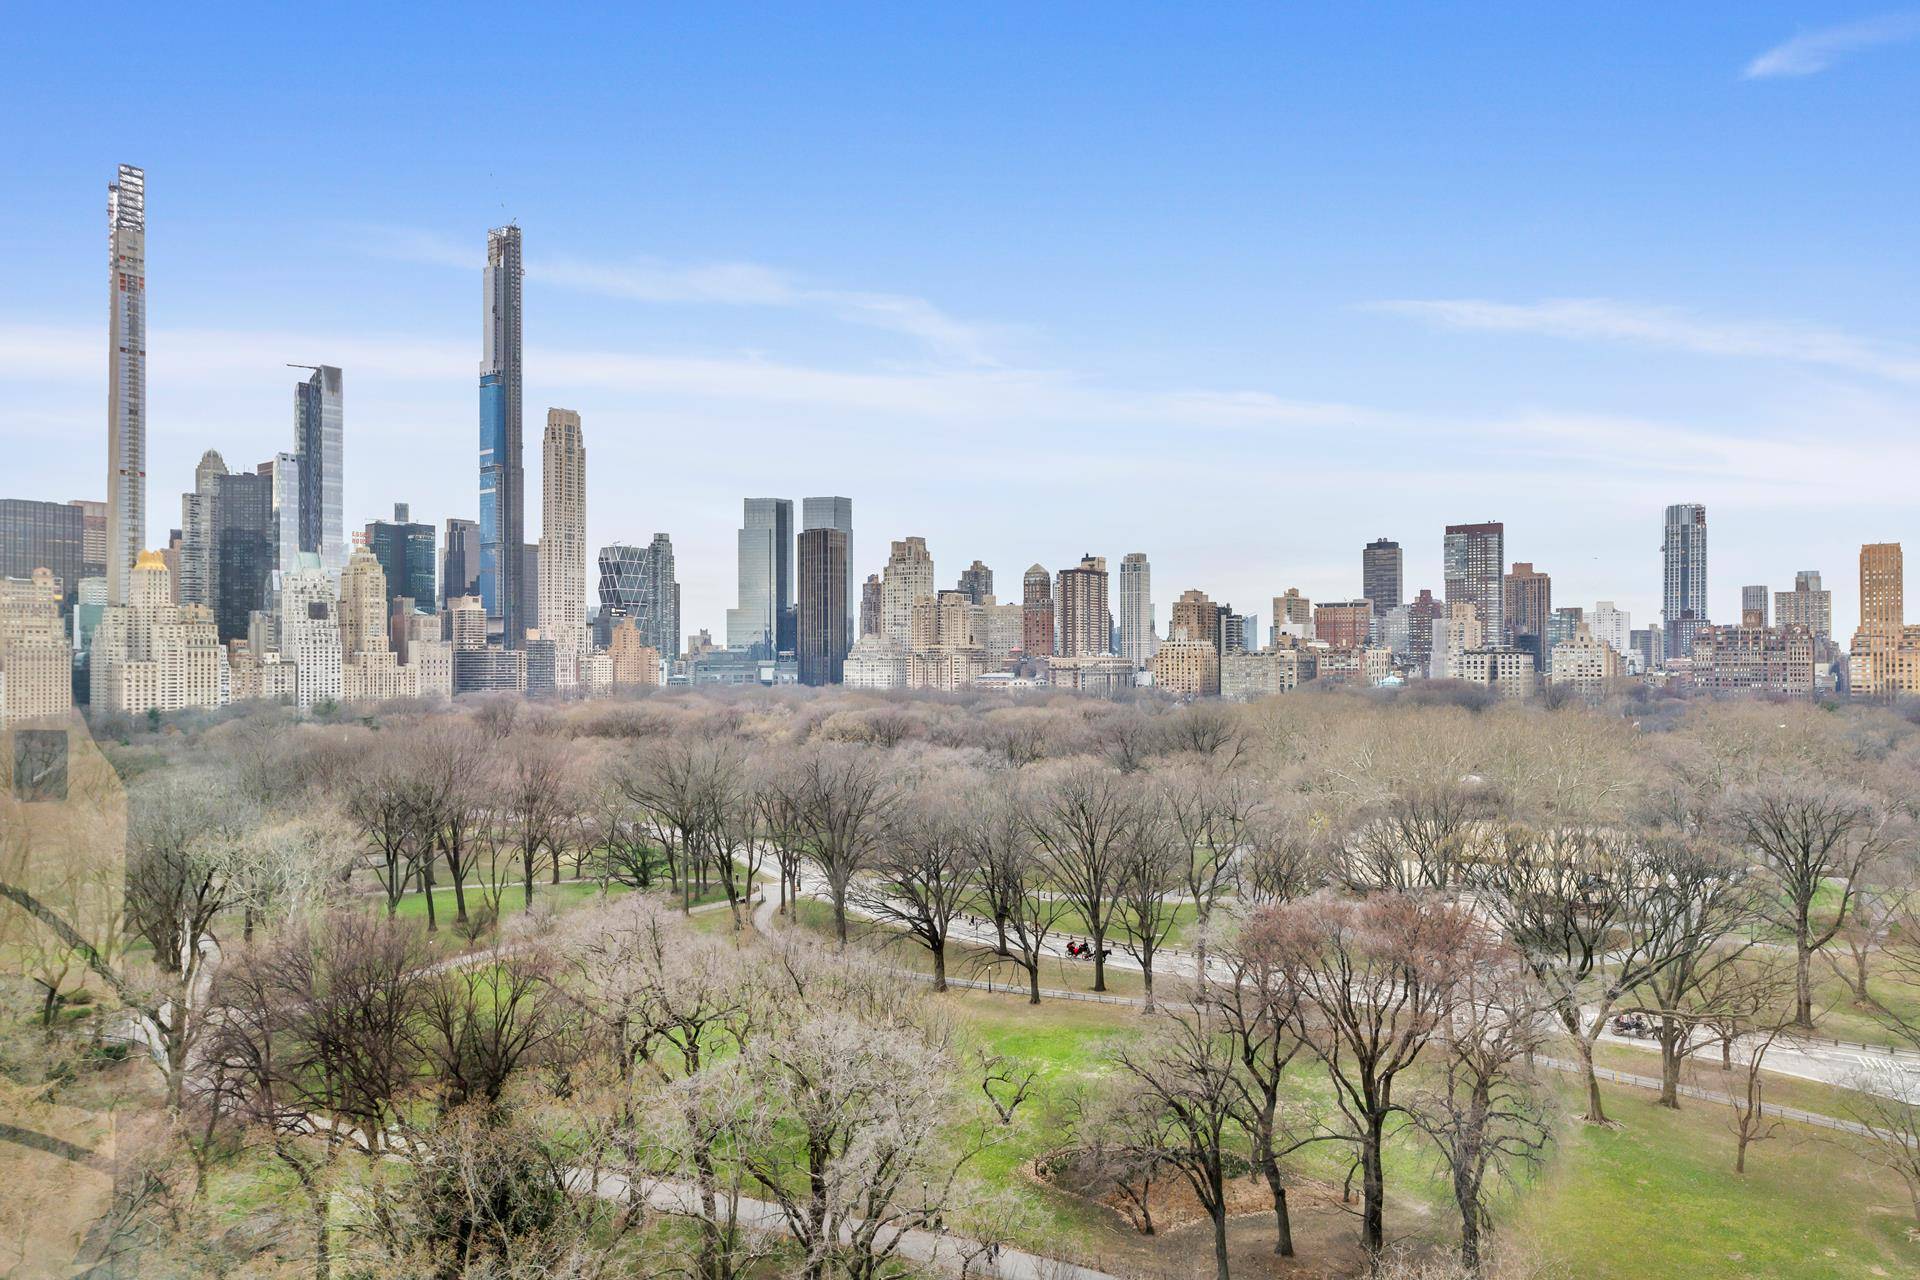 Welcome to this spectacular Fifth Avenue home boasting expansive vistas of the city skyline and Central Park.